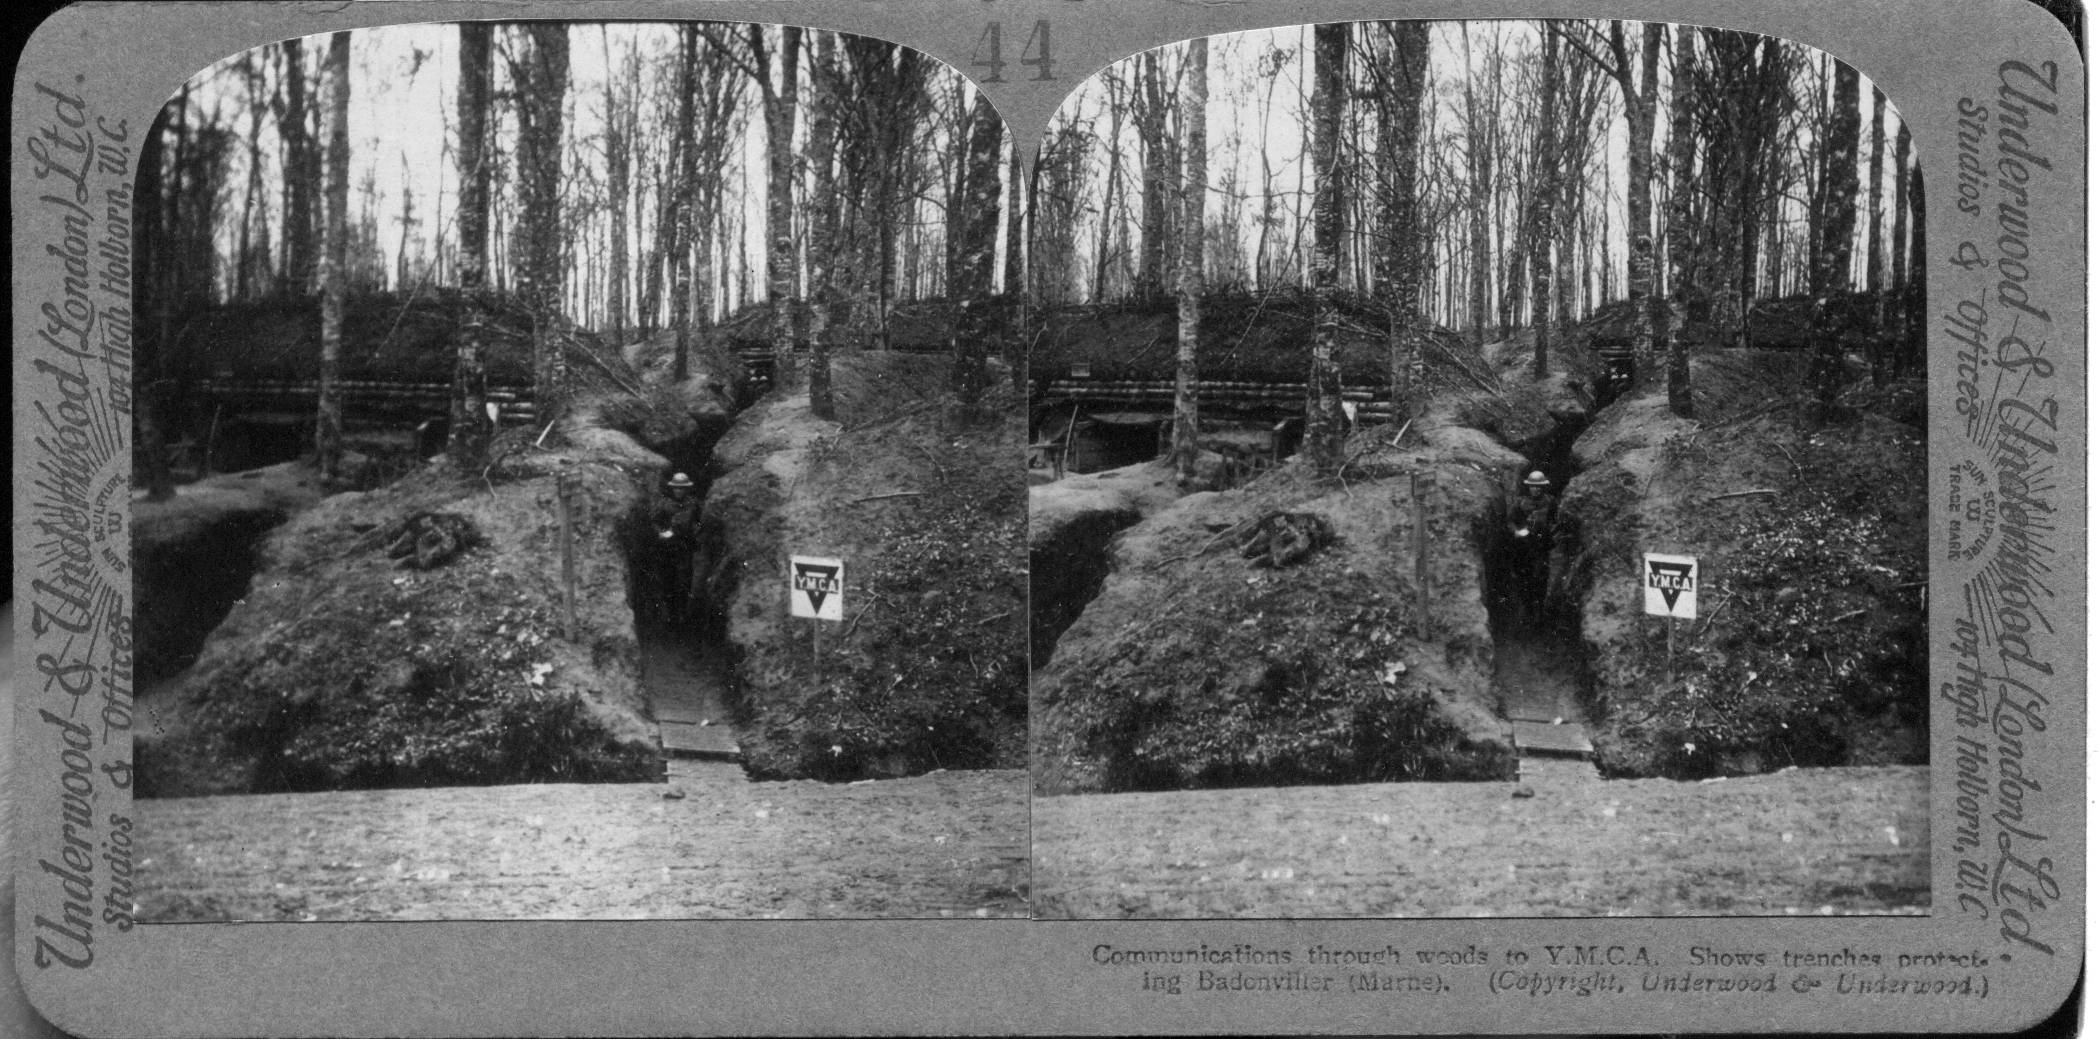 Commnunications through woods to Y.M.C.A. Shows trenches protecting Badonviller (Marne)